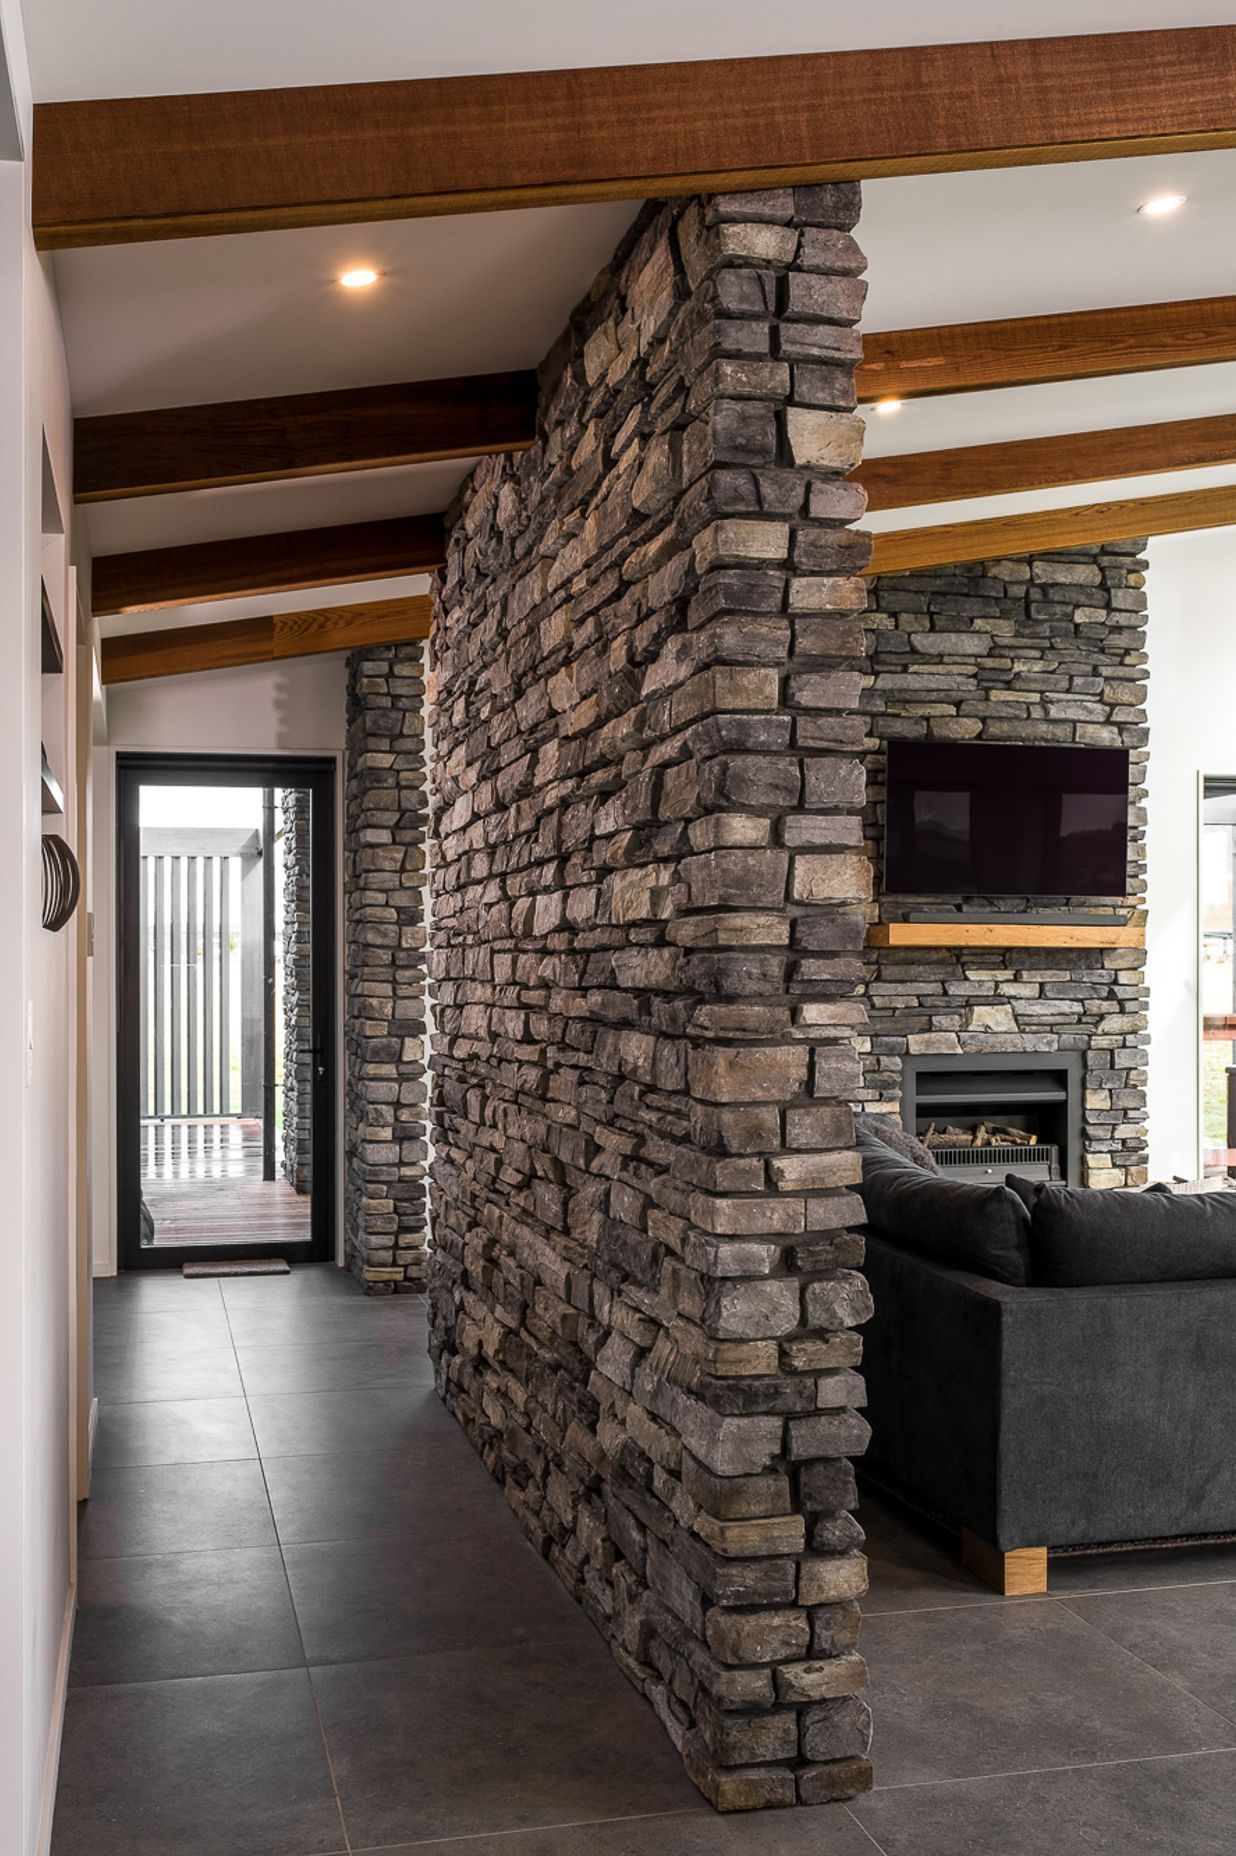 Lightweight stone veneer was used on strategic feature walls within the home to tie in the exterior stonework.